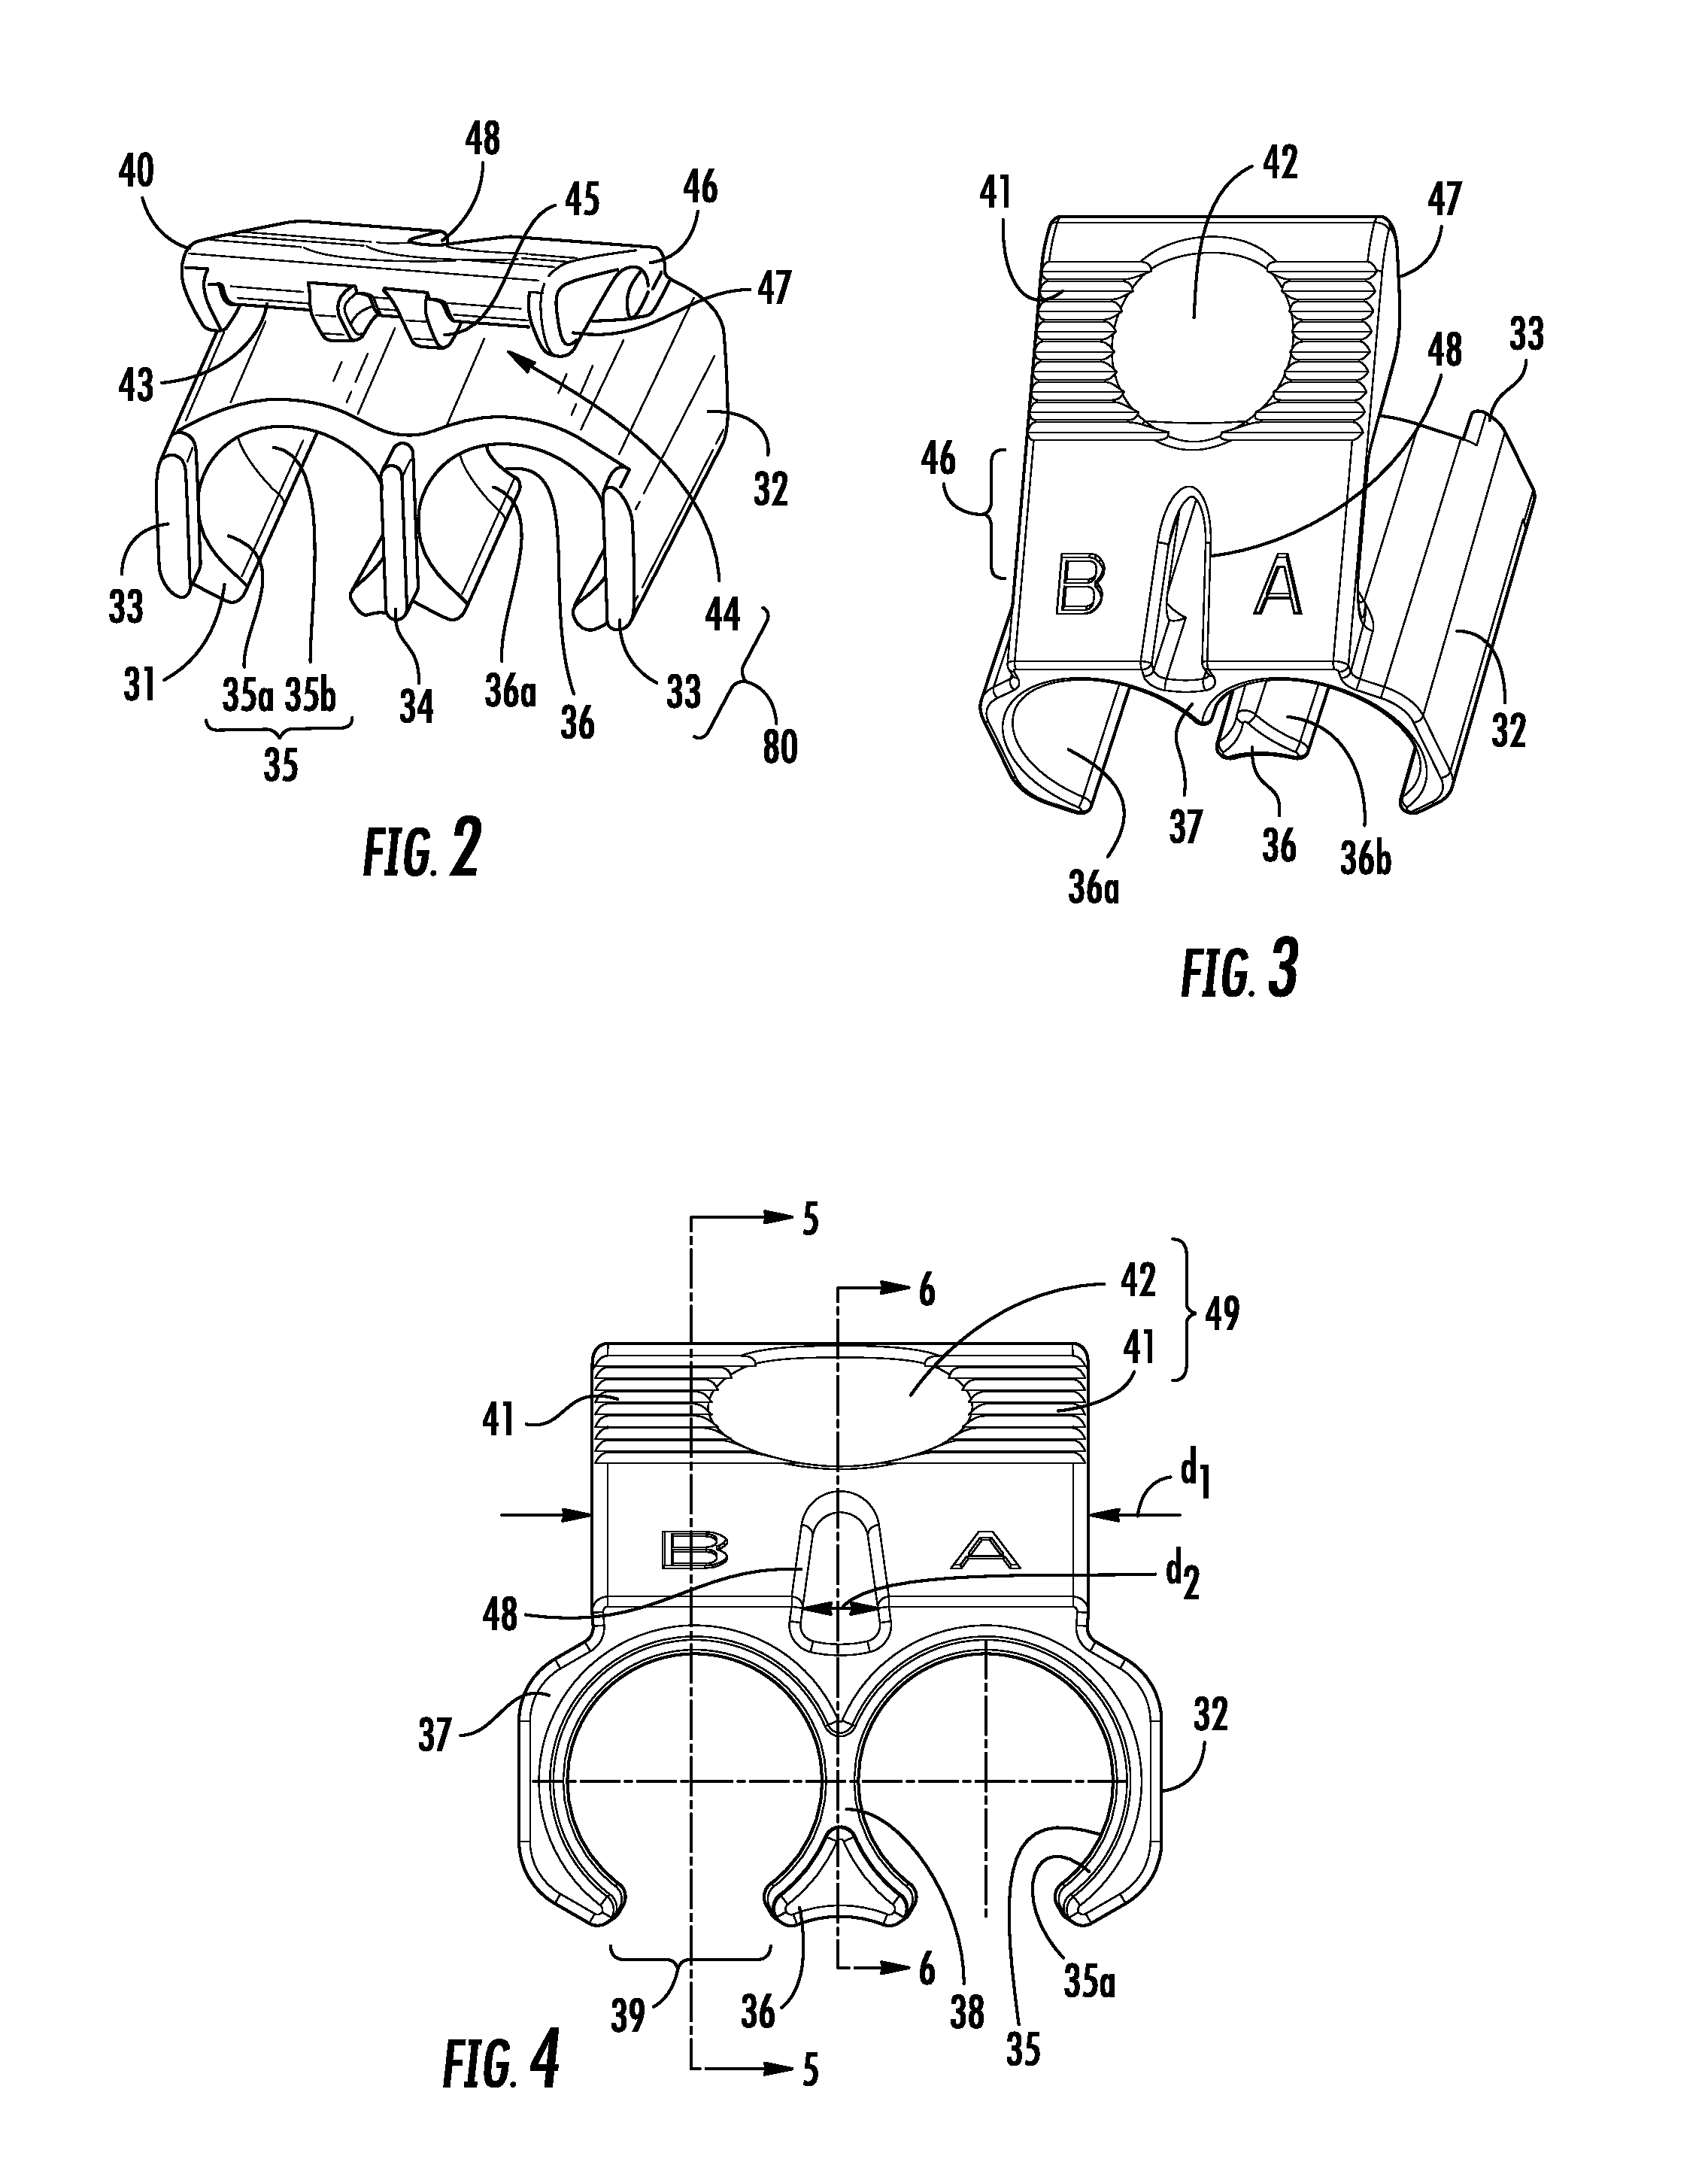 Fiber Optic Connector Assembly and Methods Therefor